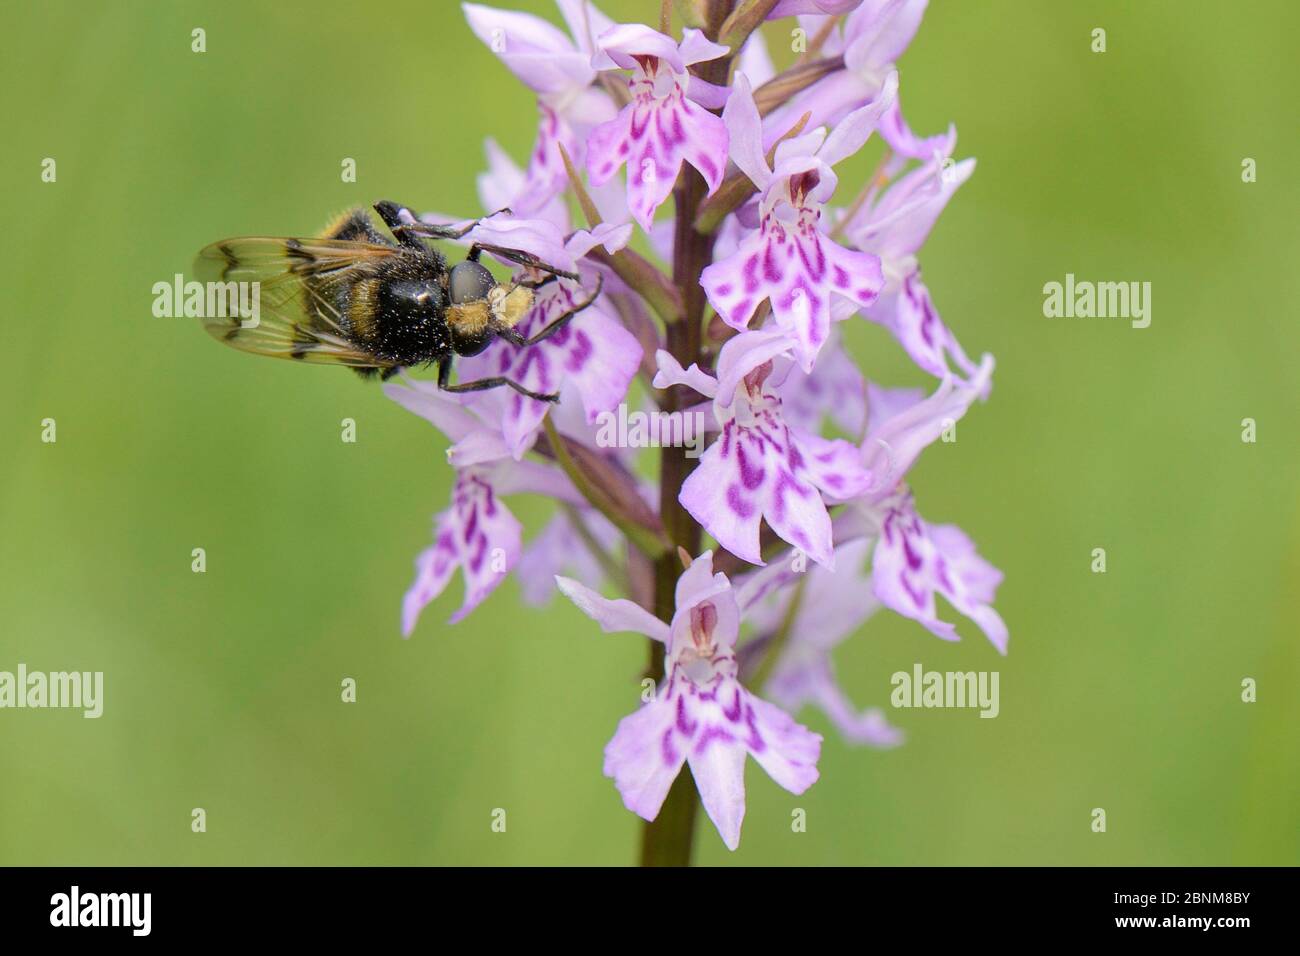 Hoverfly (Volucella bombylans var. bombylans) a mimic of the Red-tailed bumblebee nectaring on Common spotted orchid (Dactylorhiza fuchsii) on grassla Stock Photo